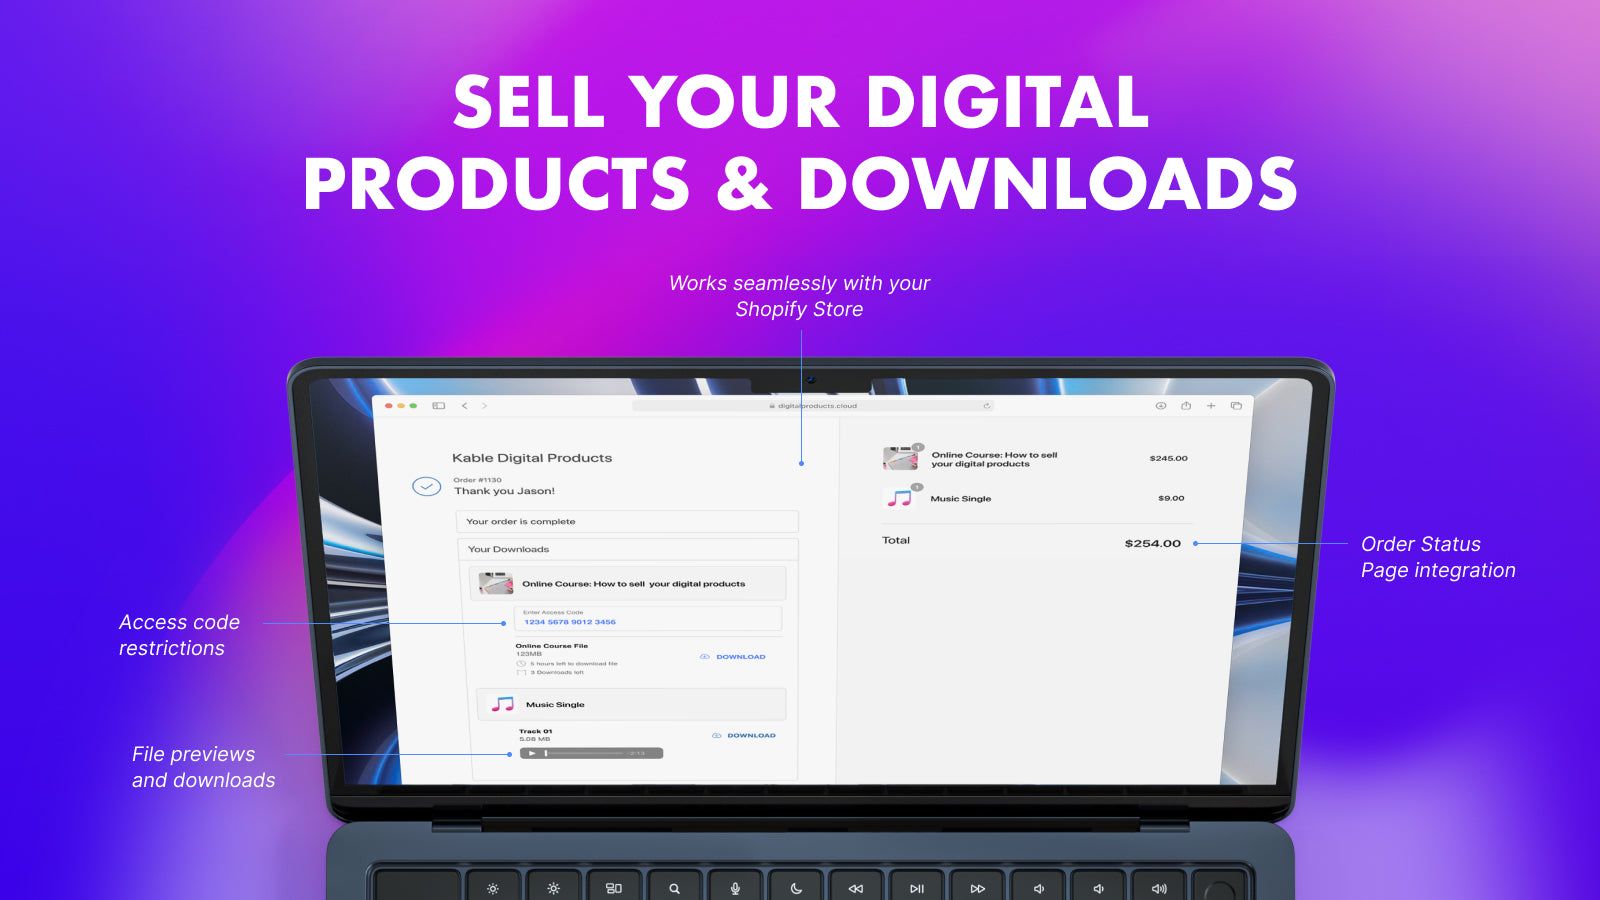 Sell your digital products quickly, easily, and securely.